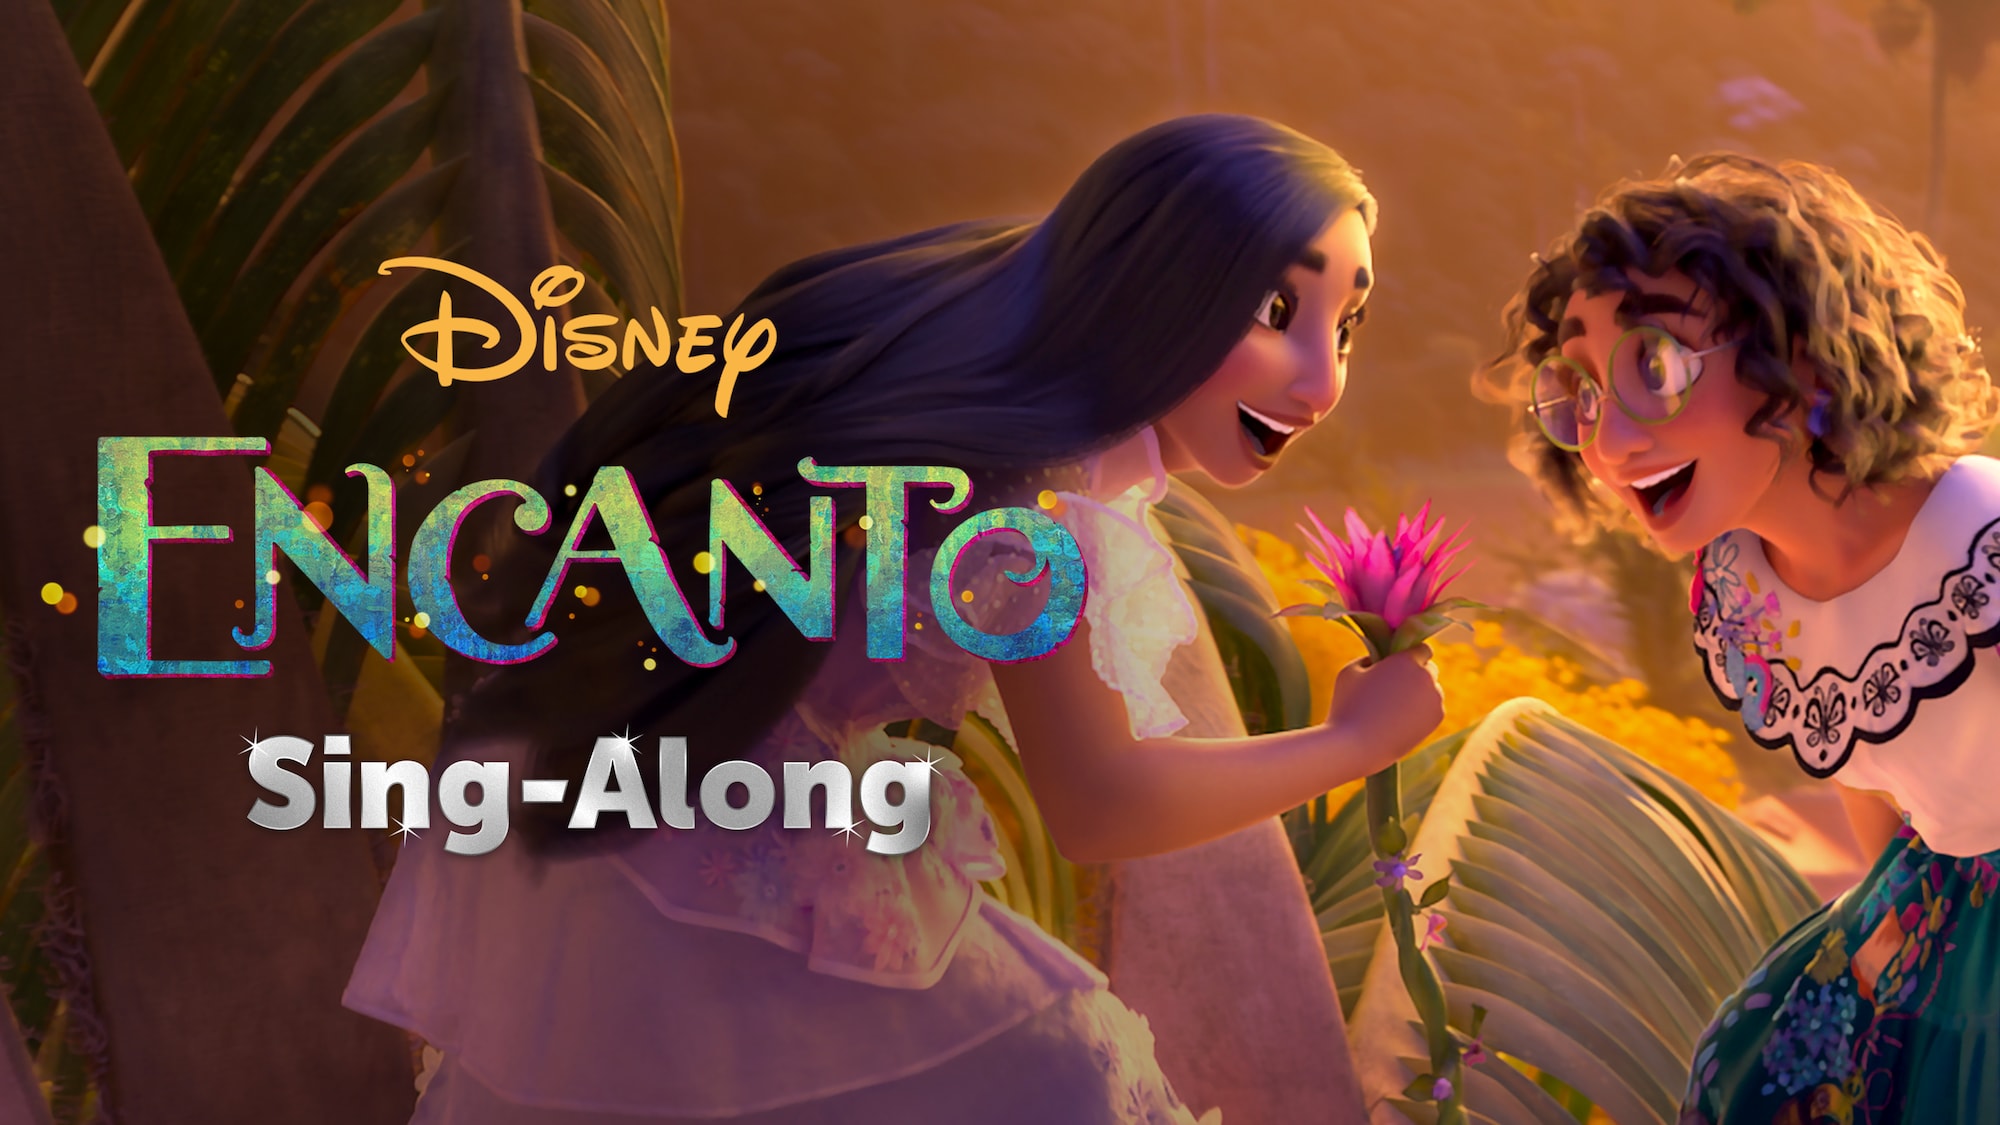 Disney+ is Releasing Sing Along Versions of Some Titles Beginning with ‘Encanto’ March 18